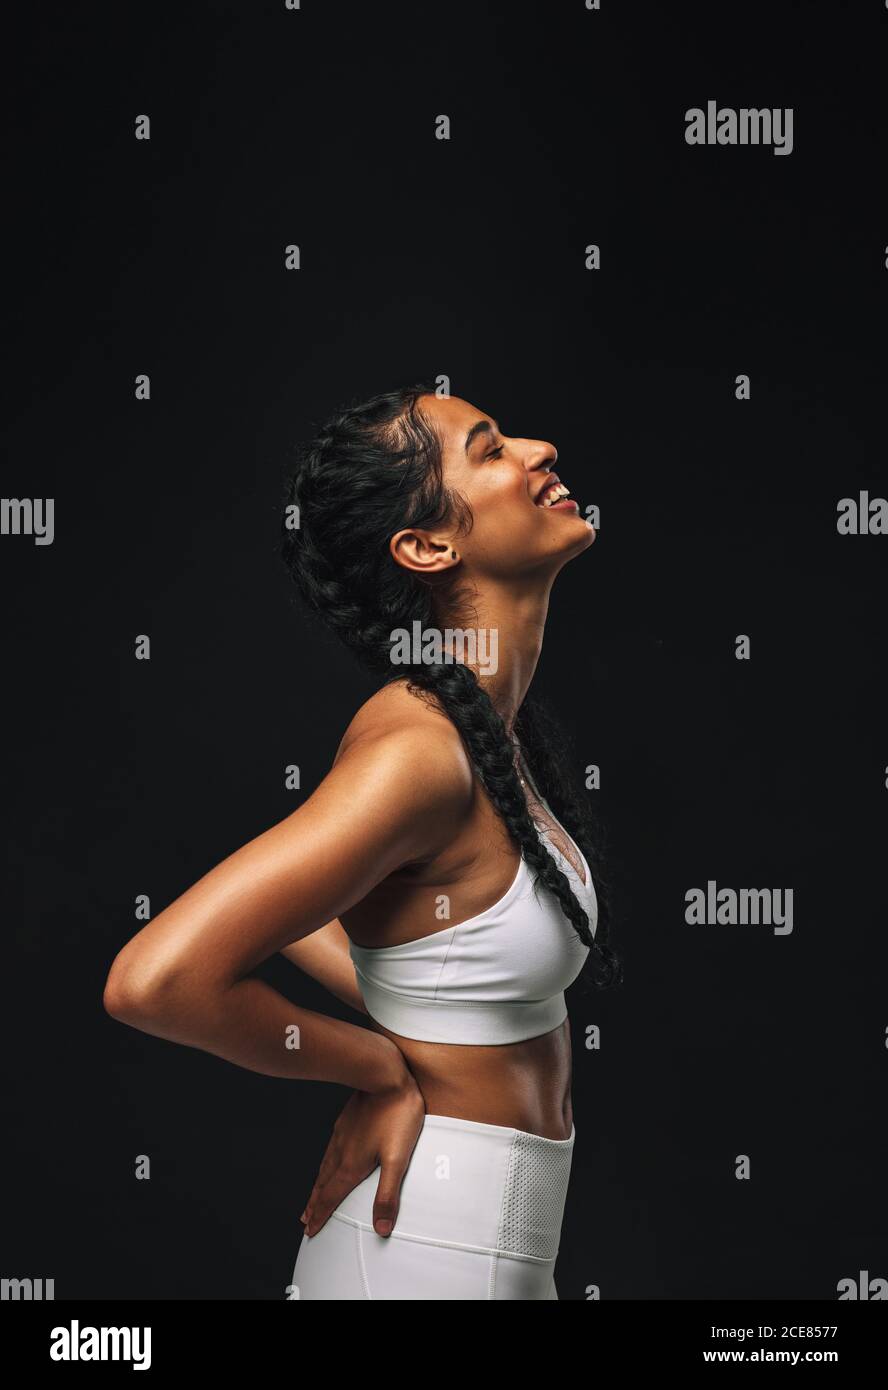 Portrait of a female athlete on black background. Smiling fit woman relaxing after workout. Stock Photo